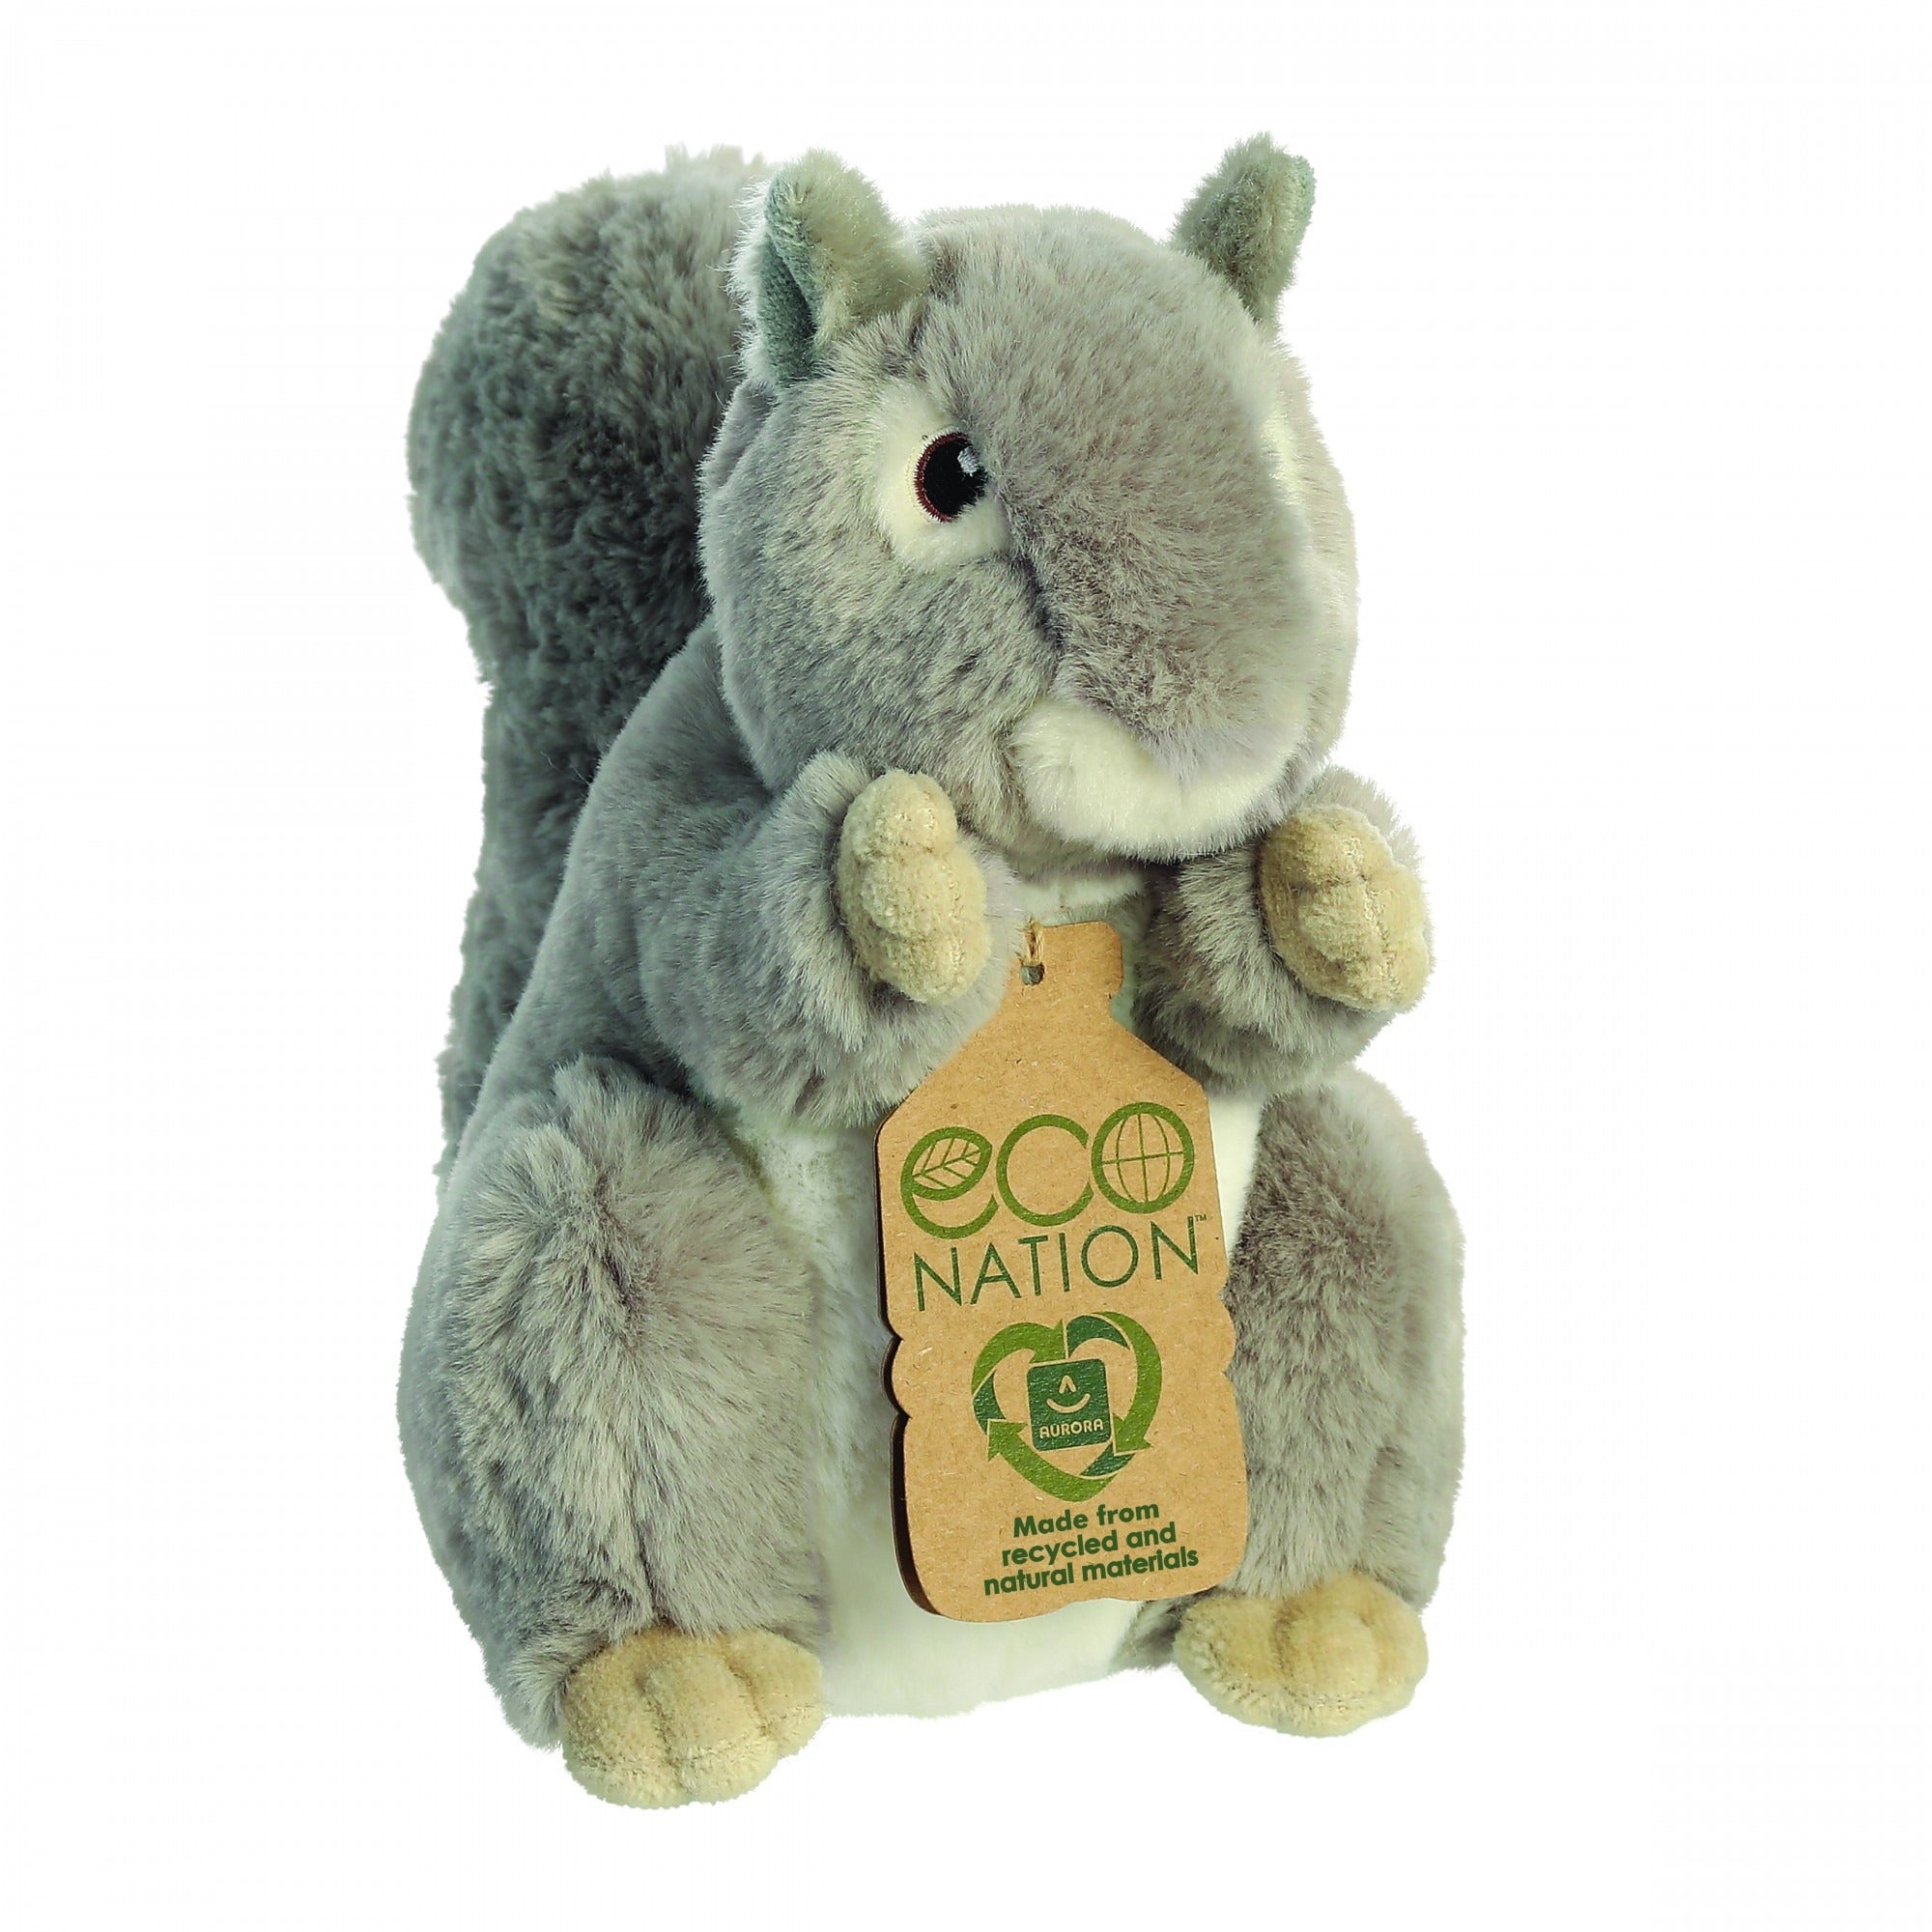 View 8 Inch Eco Nation Squirrel information